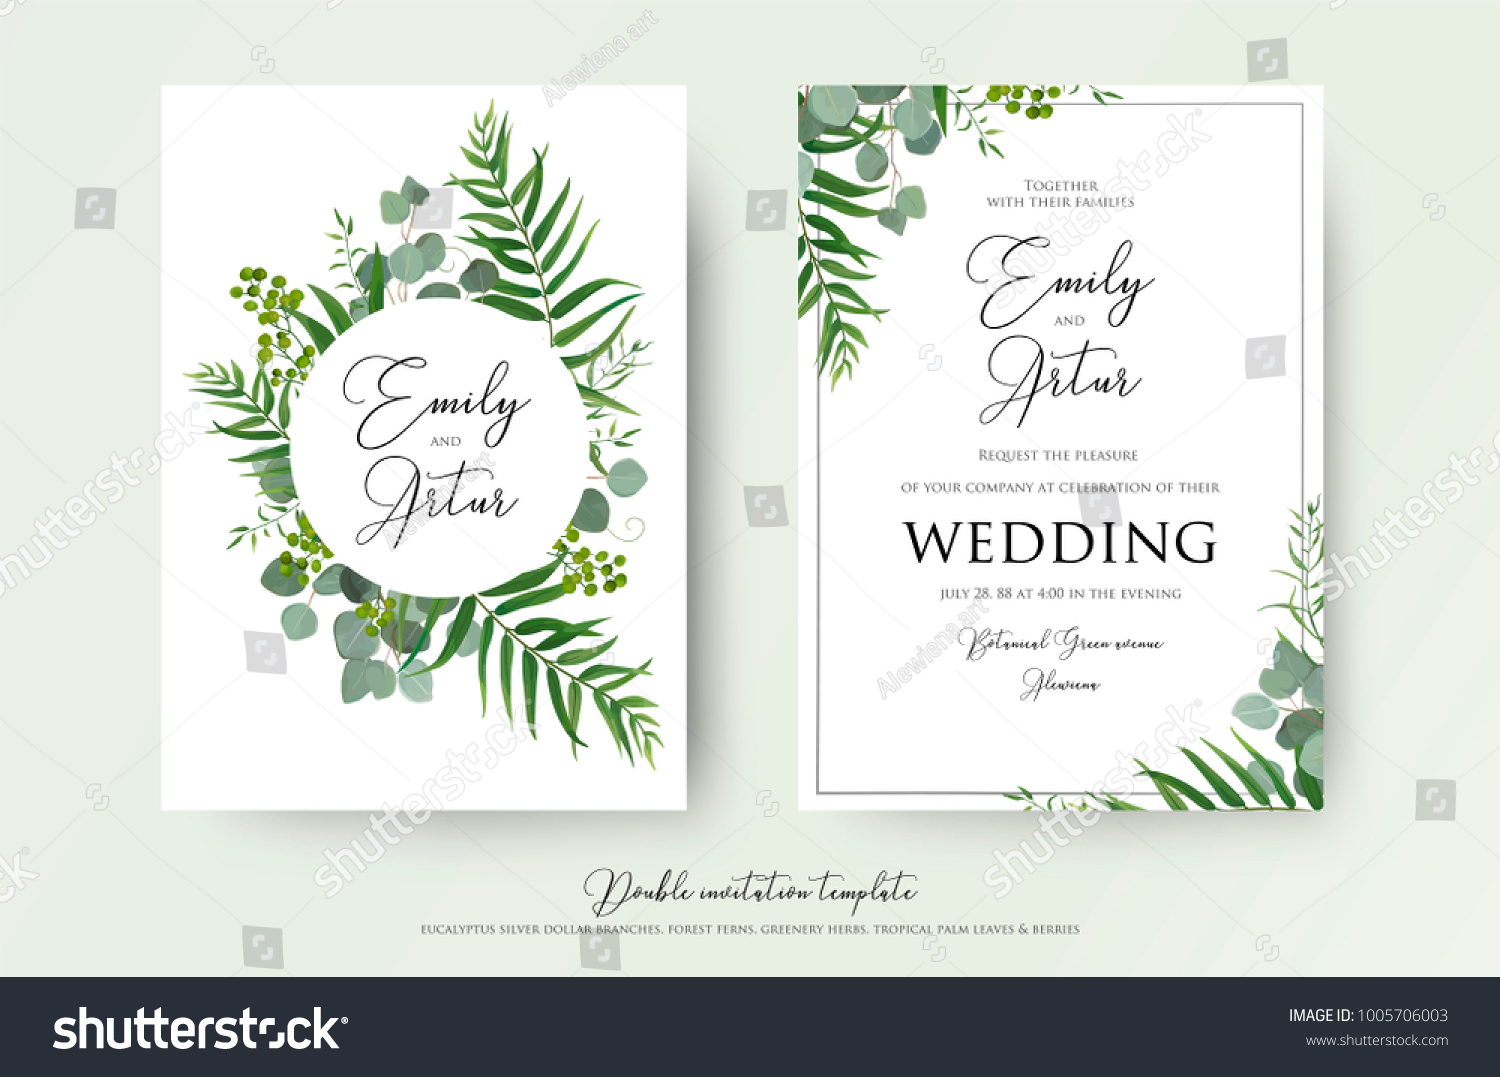 Wedding Invitation, floral invite thank you, rsvp modern card Design: green tropical palm leaf greenery eucalyptus branches decorative wreath & frame pattern. Vector elegant watercolor rustic template #1005706003